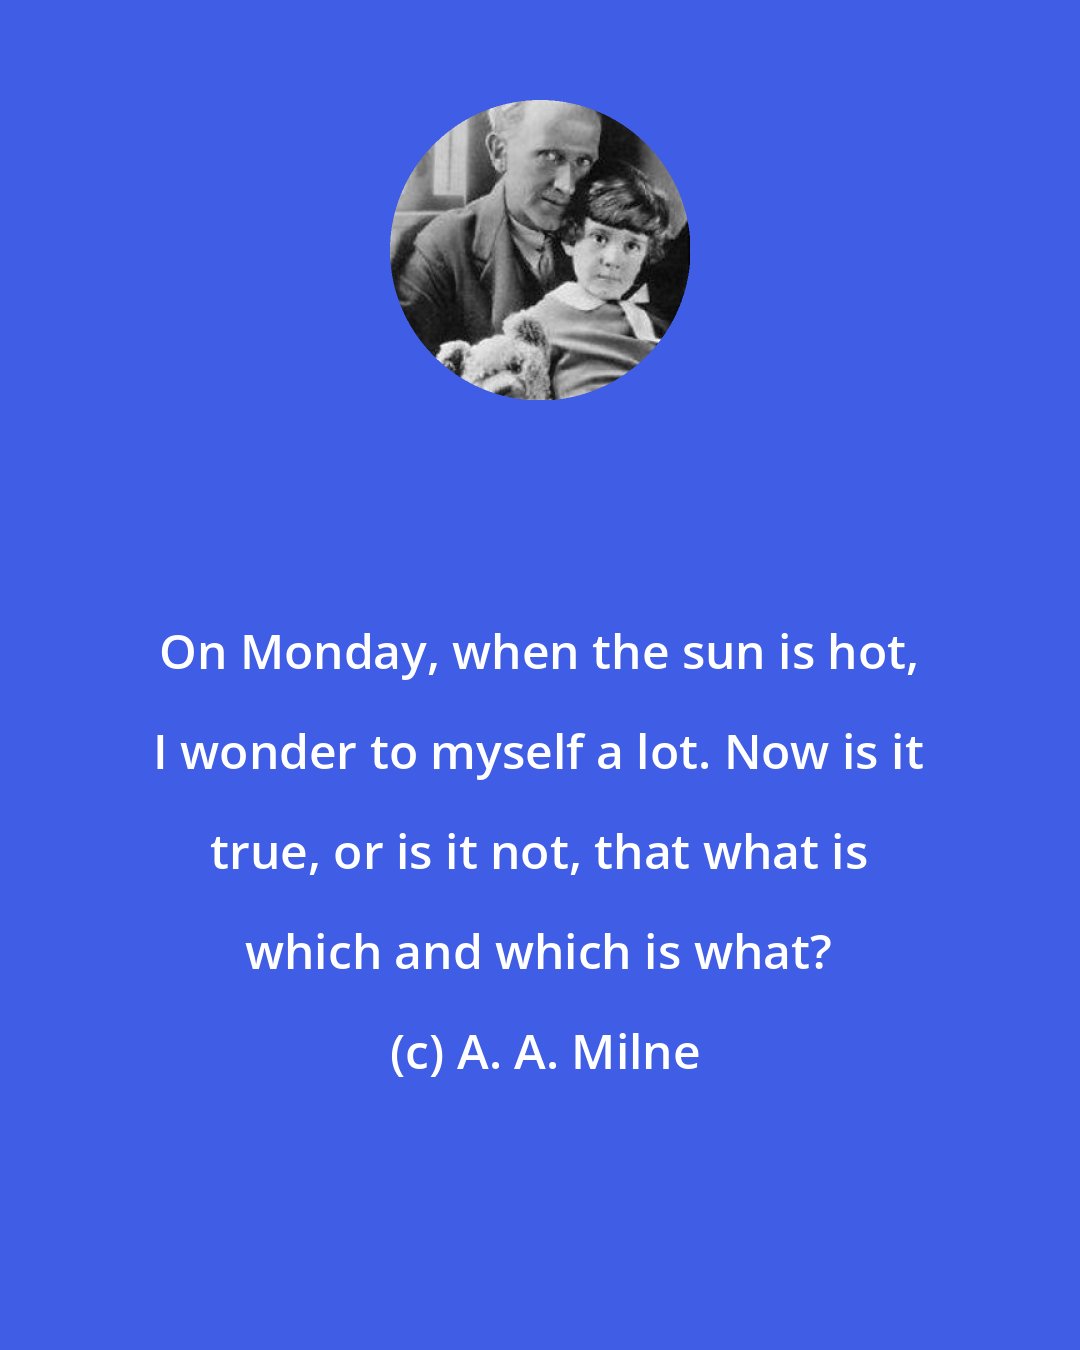 A. A. Milne: On Monday, when the sun is hot, I wonder to myself a lot. Now is it true, or is it not, that what is which and which is what?